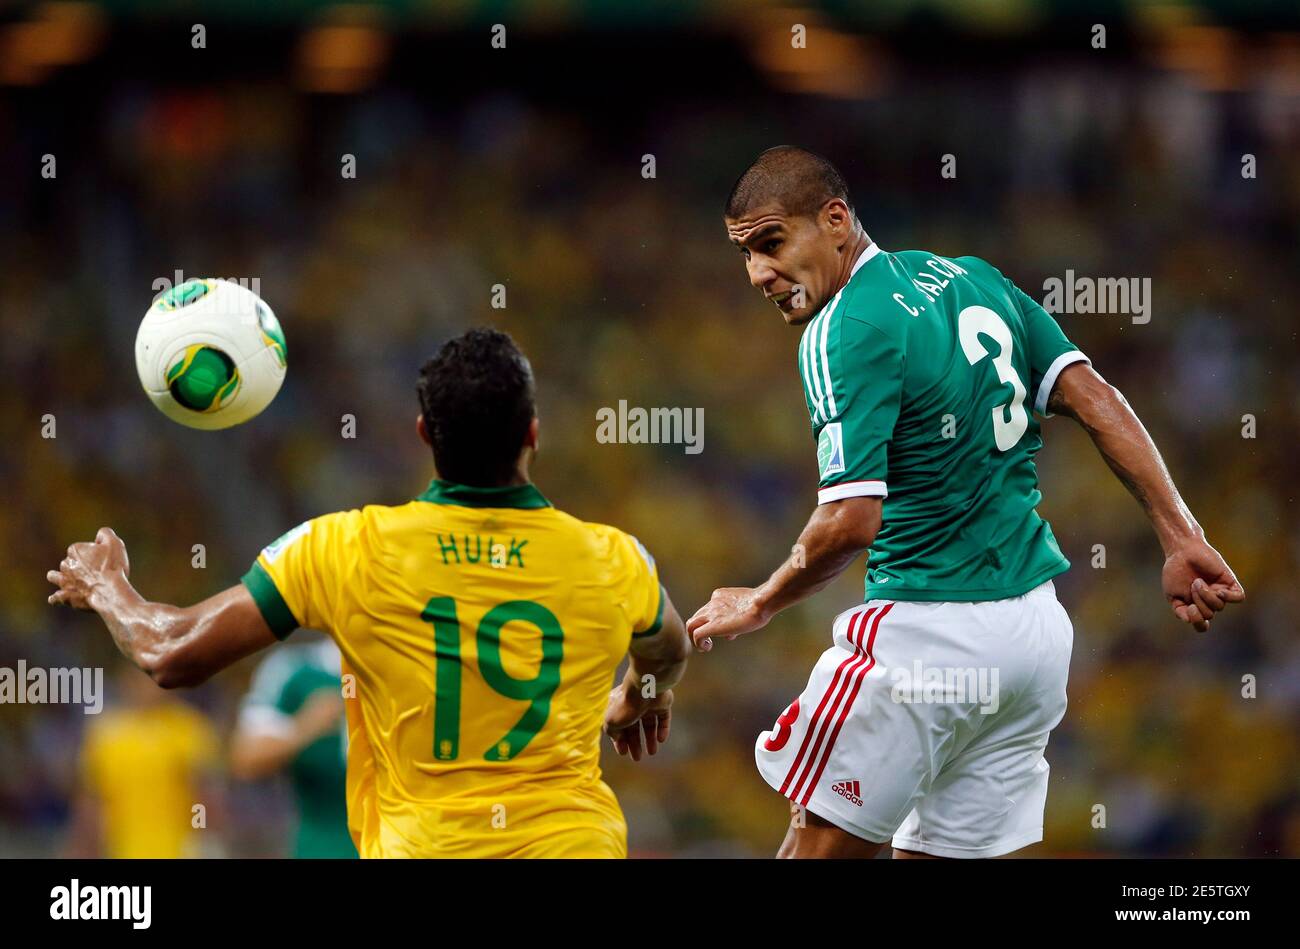 Brazil's Hulk (L) fights for the ball with Mexico's Carlos Salcido during  their Confederations Cup Group A soccer match at the Estadio Castelao in  Fortaleza June 19, 2013. REUTERS/Jorge Silva (BRAZIL -